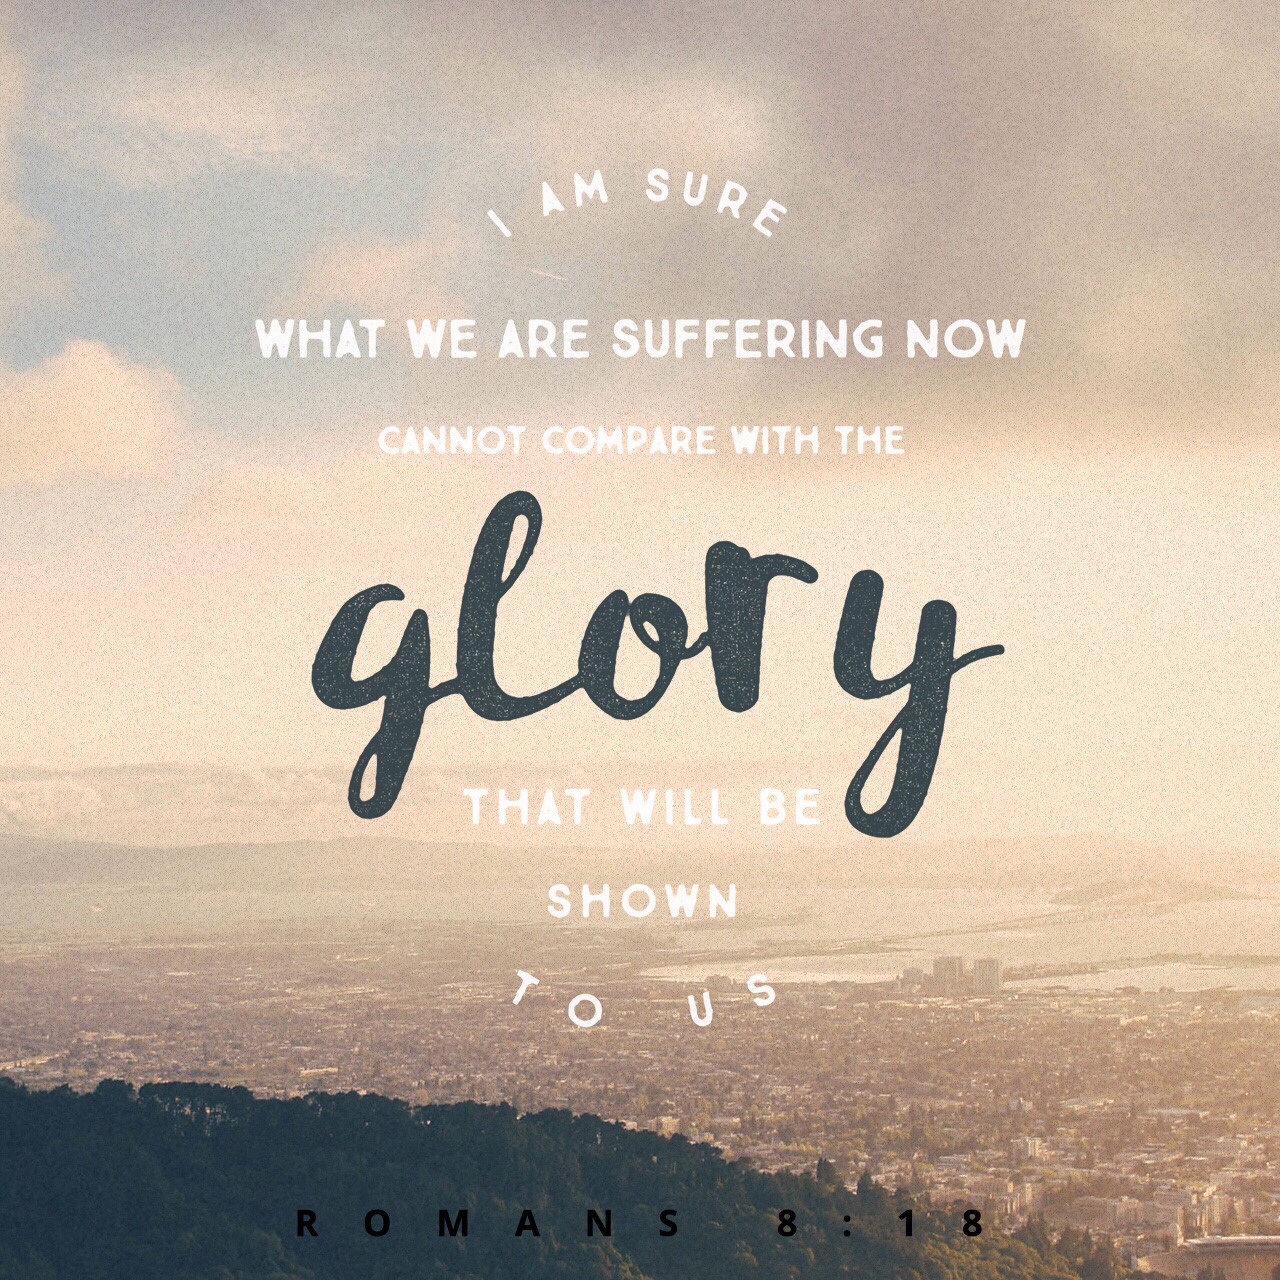 VOTD June 3, 2019 “For I consider that the sufferings of this present time are not worthy to be compared with the glory that is to be revealed to us.” ‭‭ROMANS‬ ‭8:18‬ ‭NASB‬‬ 